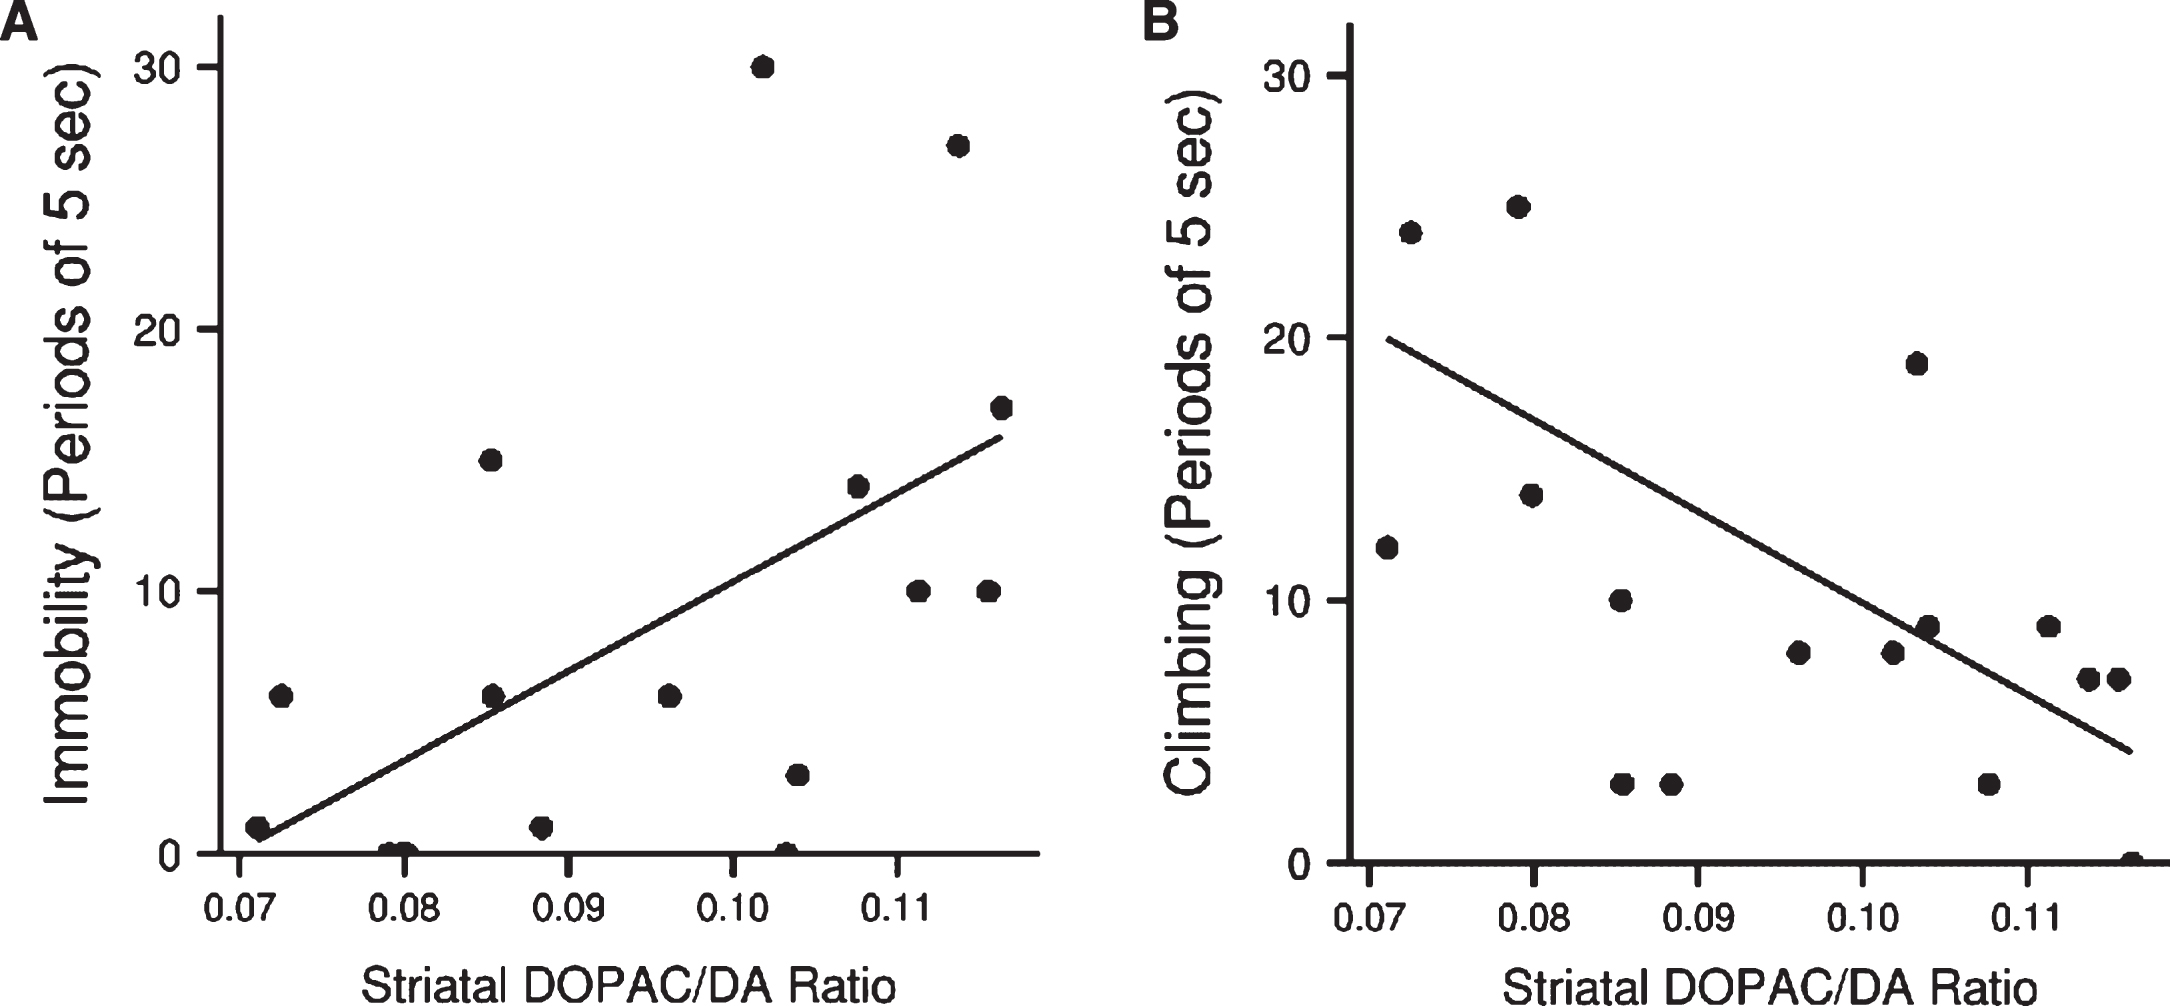 (A) Association between dopamine turnover in striatum of LPS treated animals and immobility (Spearman’s rho = 0.6, p < 0.05, n = 17) and (B) climbing (rho = – 0.7, p < 0.01, n = 17) in the forced swim test.